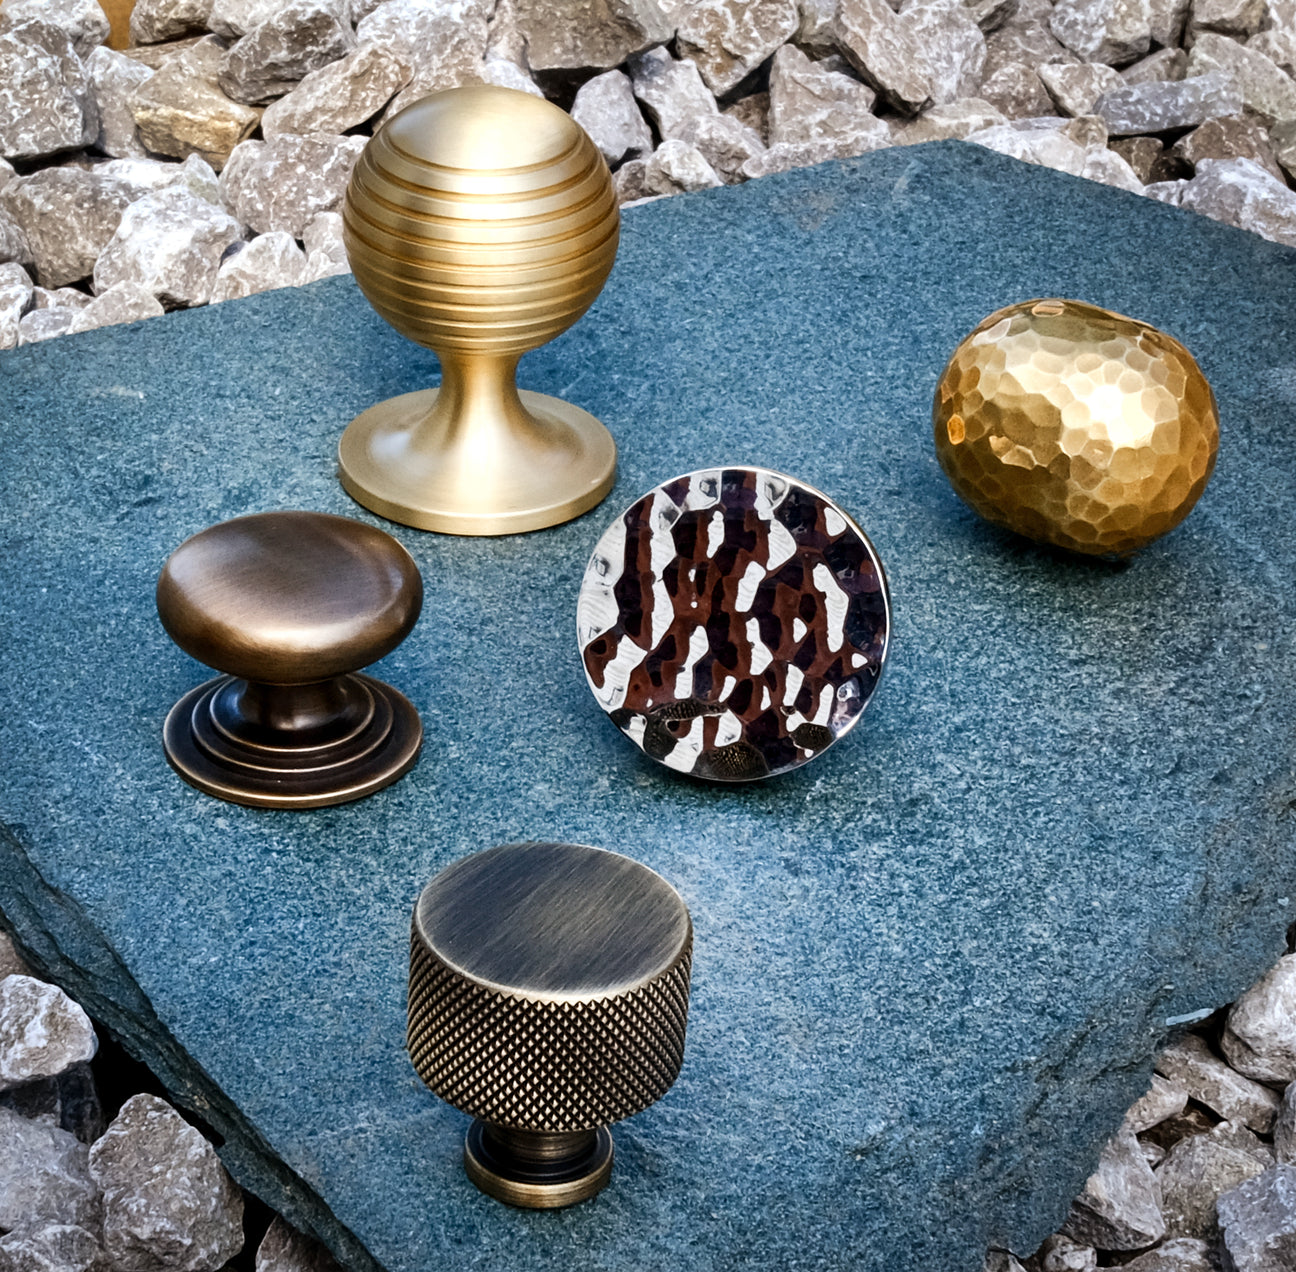 Image showing a selection of cabinet knobs made by Alexander & Wilks